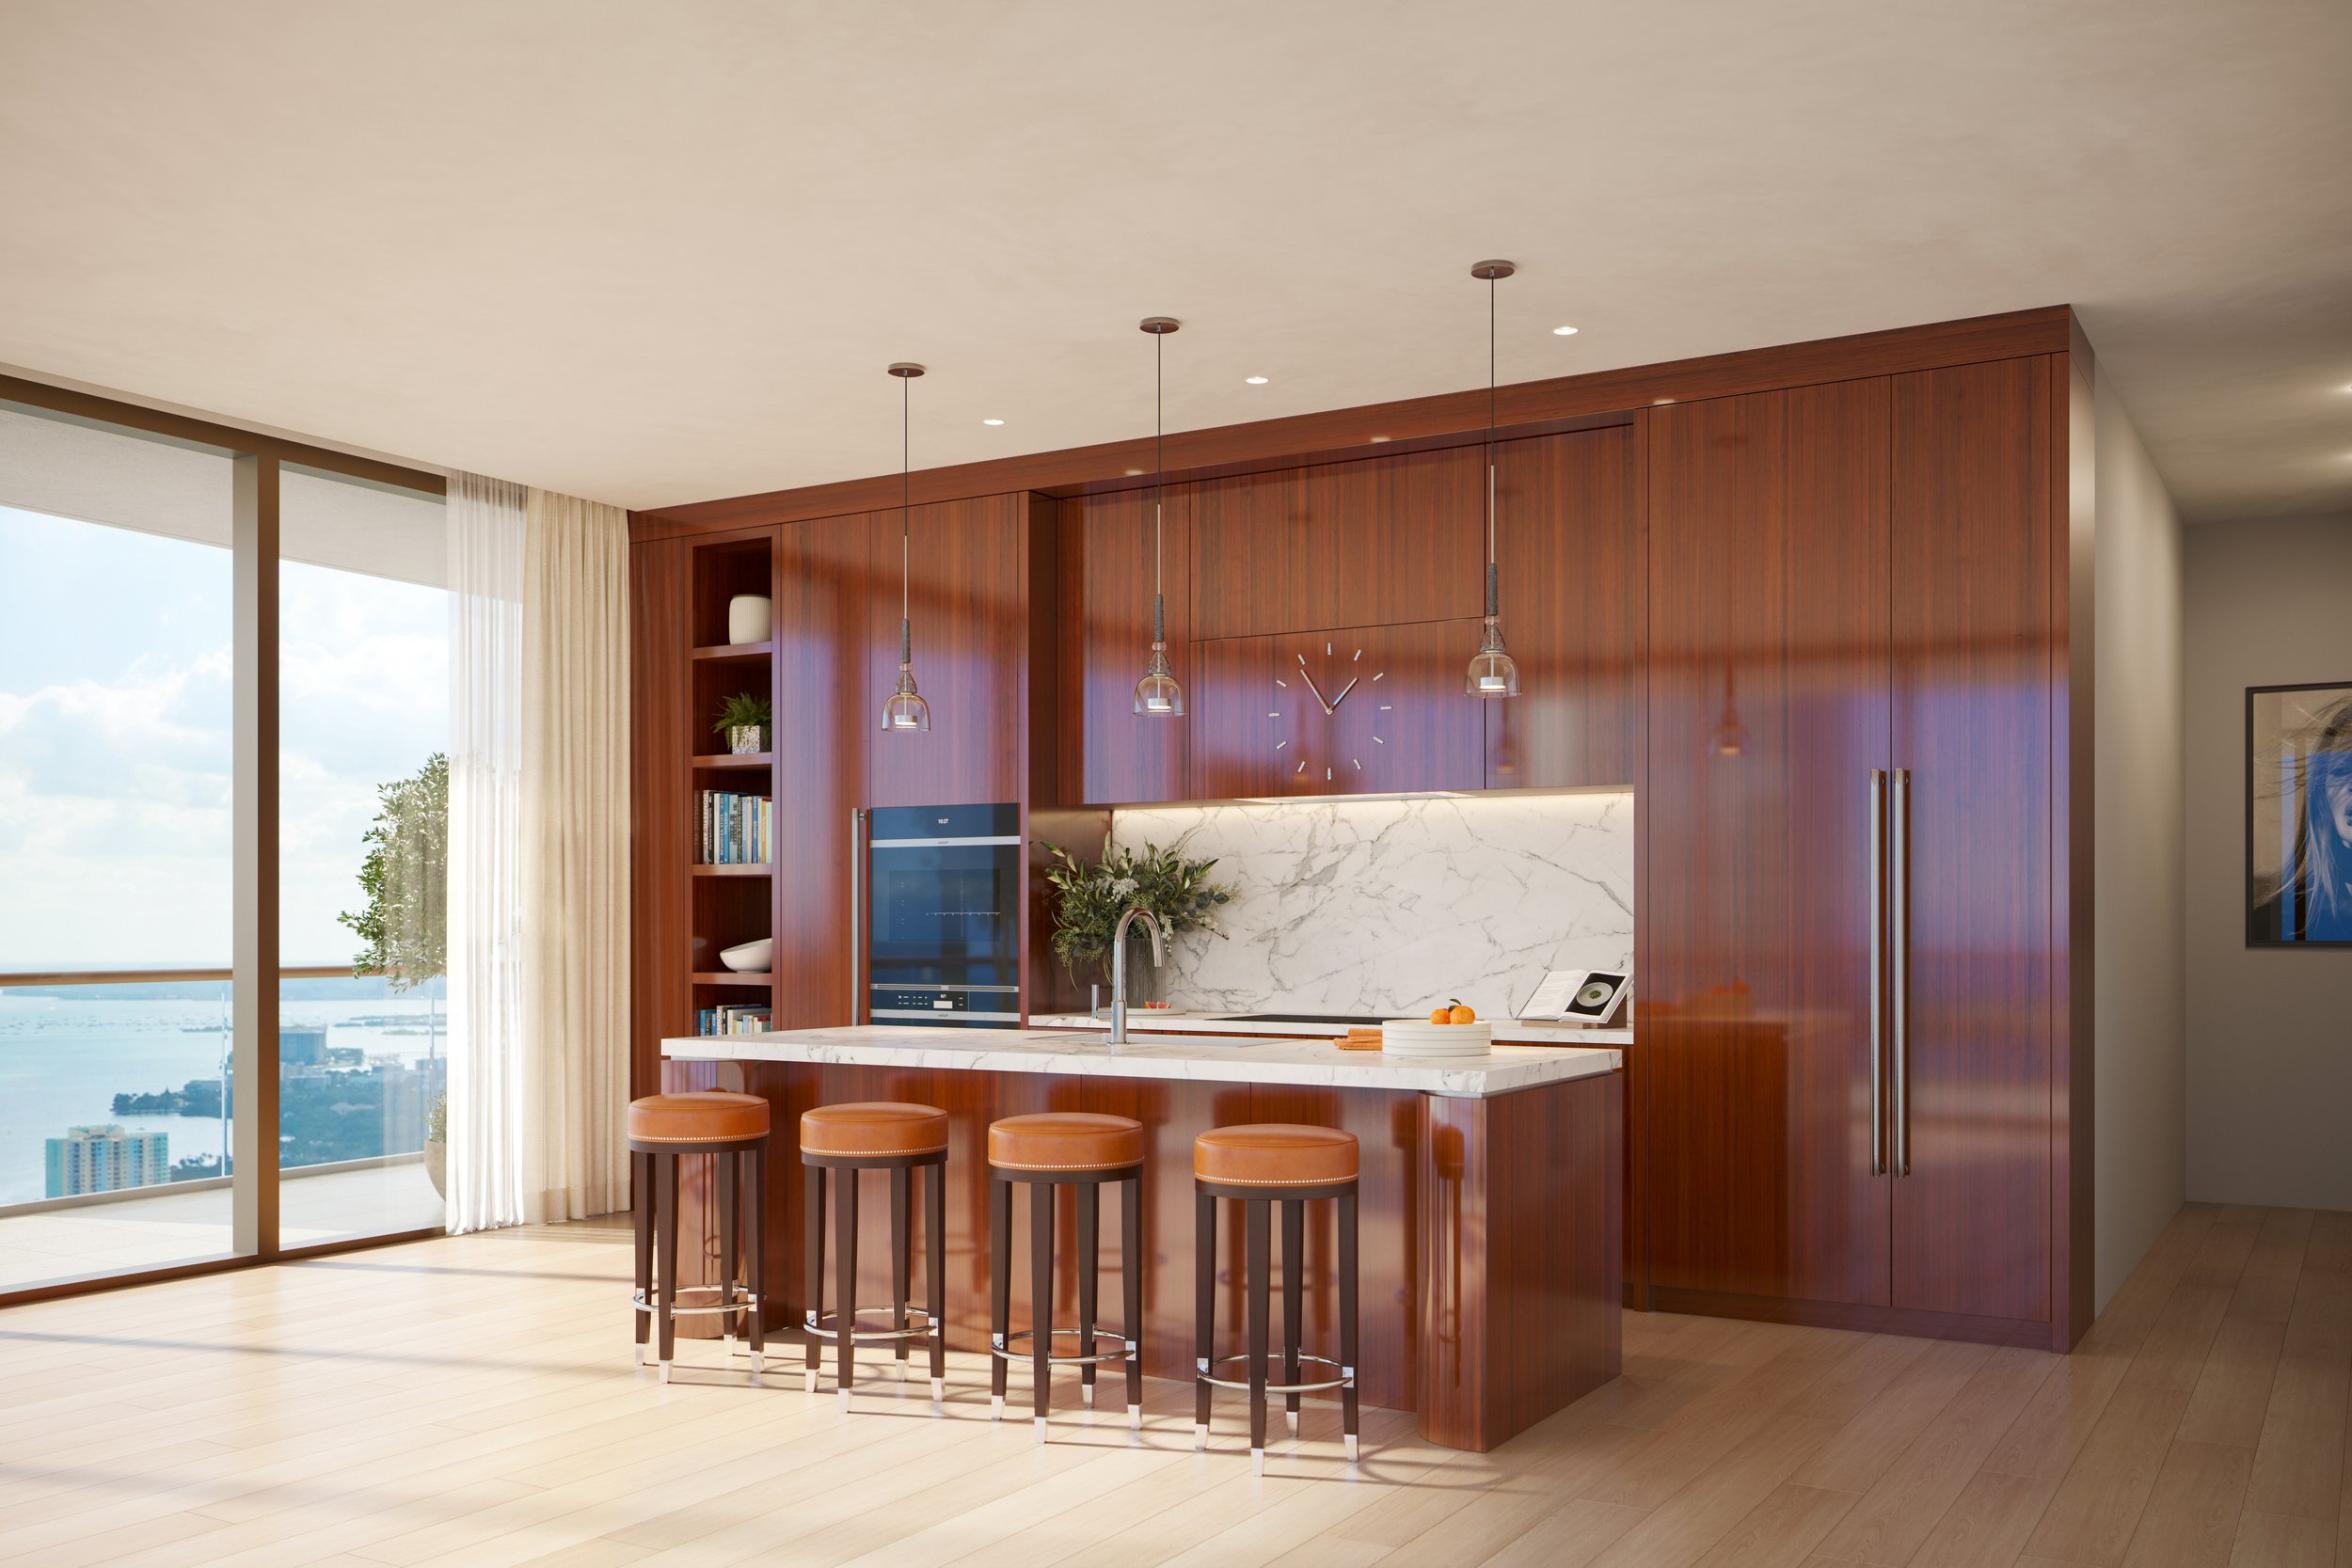 Cipriani Residences Miami Reveals First Look At Interiors By 1508 London 8.jpg